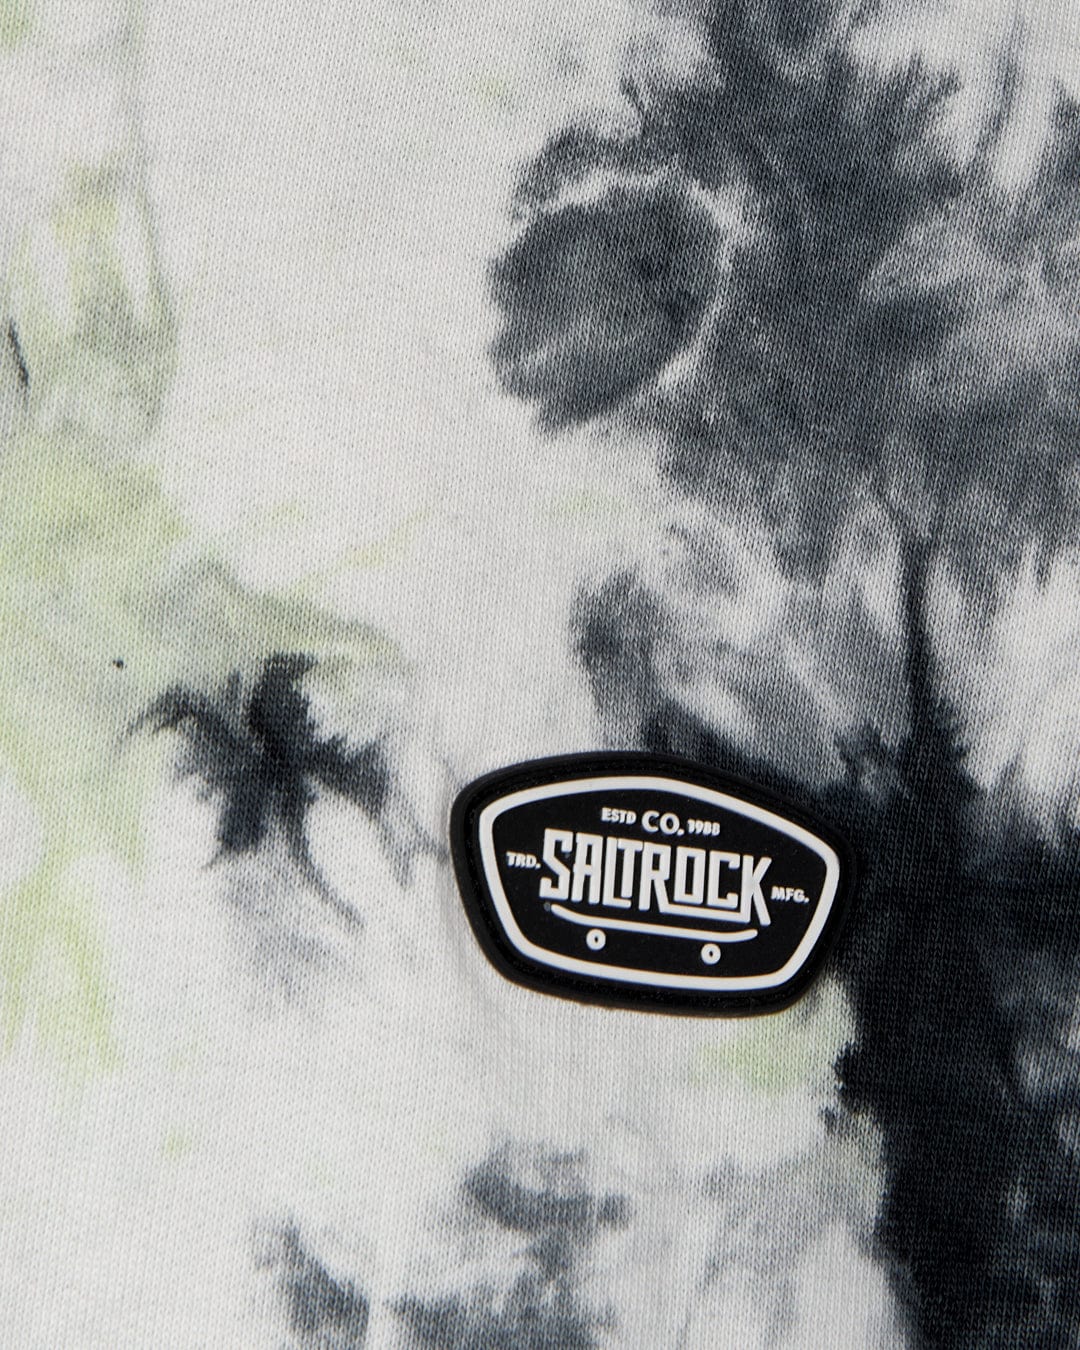 Black and white tie-dye fabric with a small "Saltrock" patch featuring text "ESTD CO. 1993" on the lower right, complemented by a cozy kangaroo pocket. The product is the Las Vegas Smackdown - Kids Glow in the Dark Oversized Pop Hoodie - Multi from Saltrock.